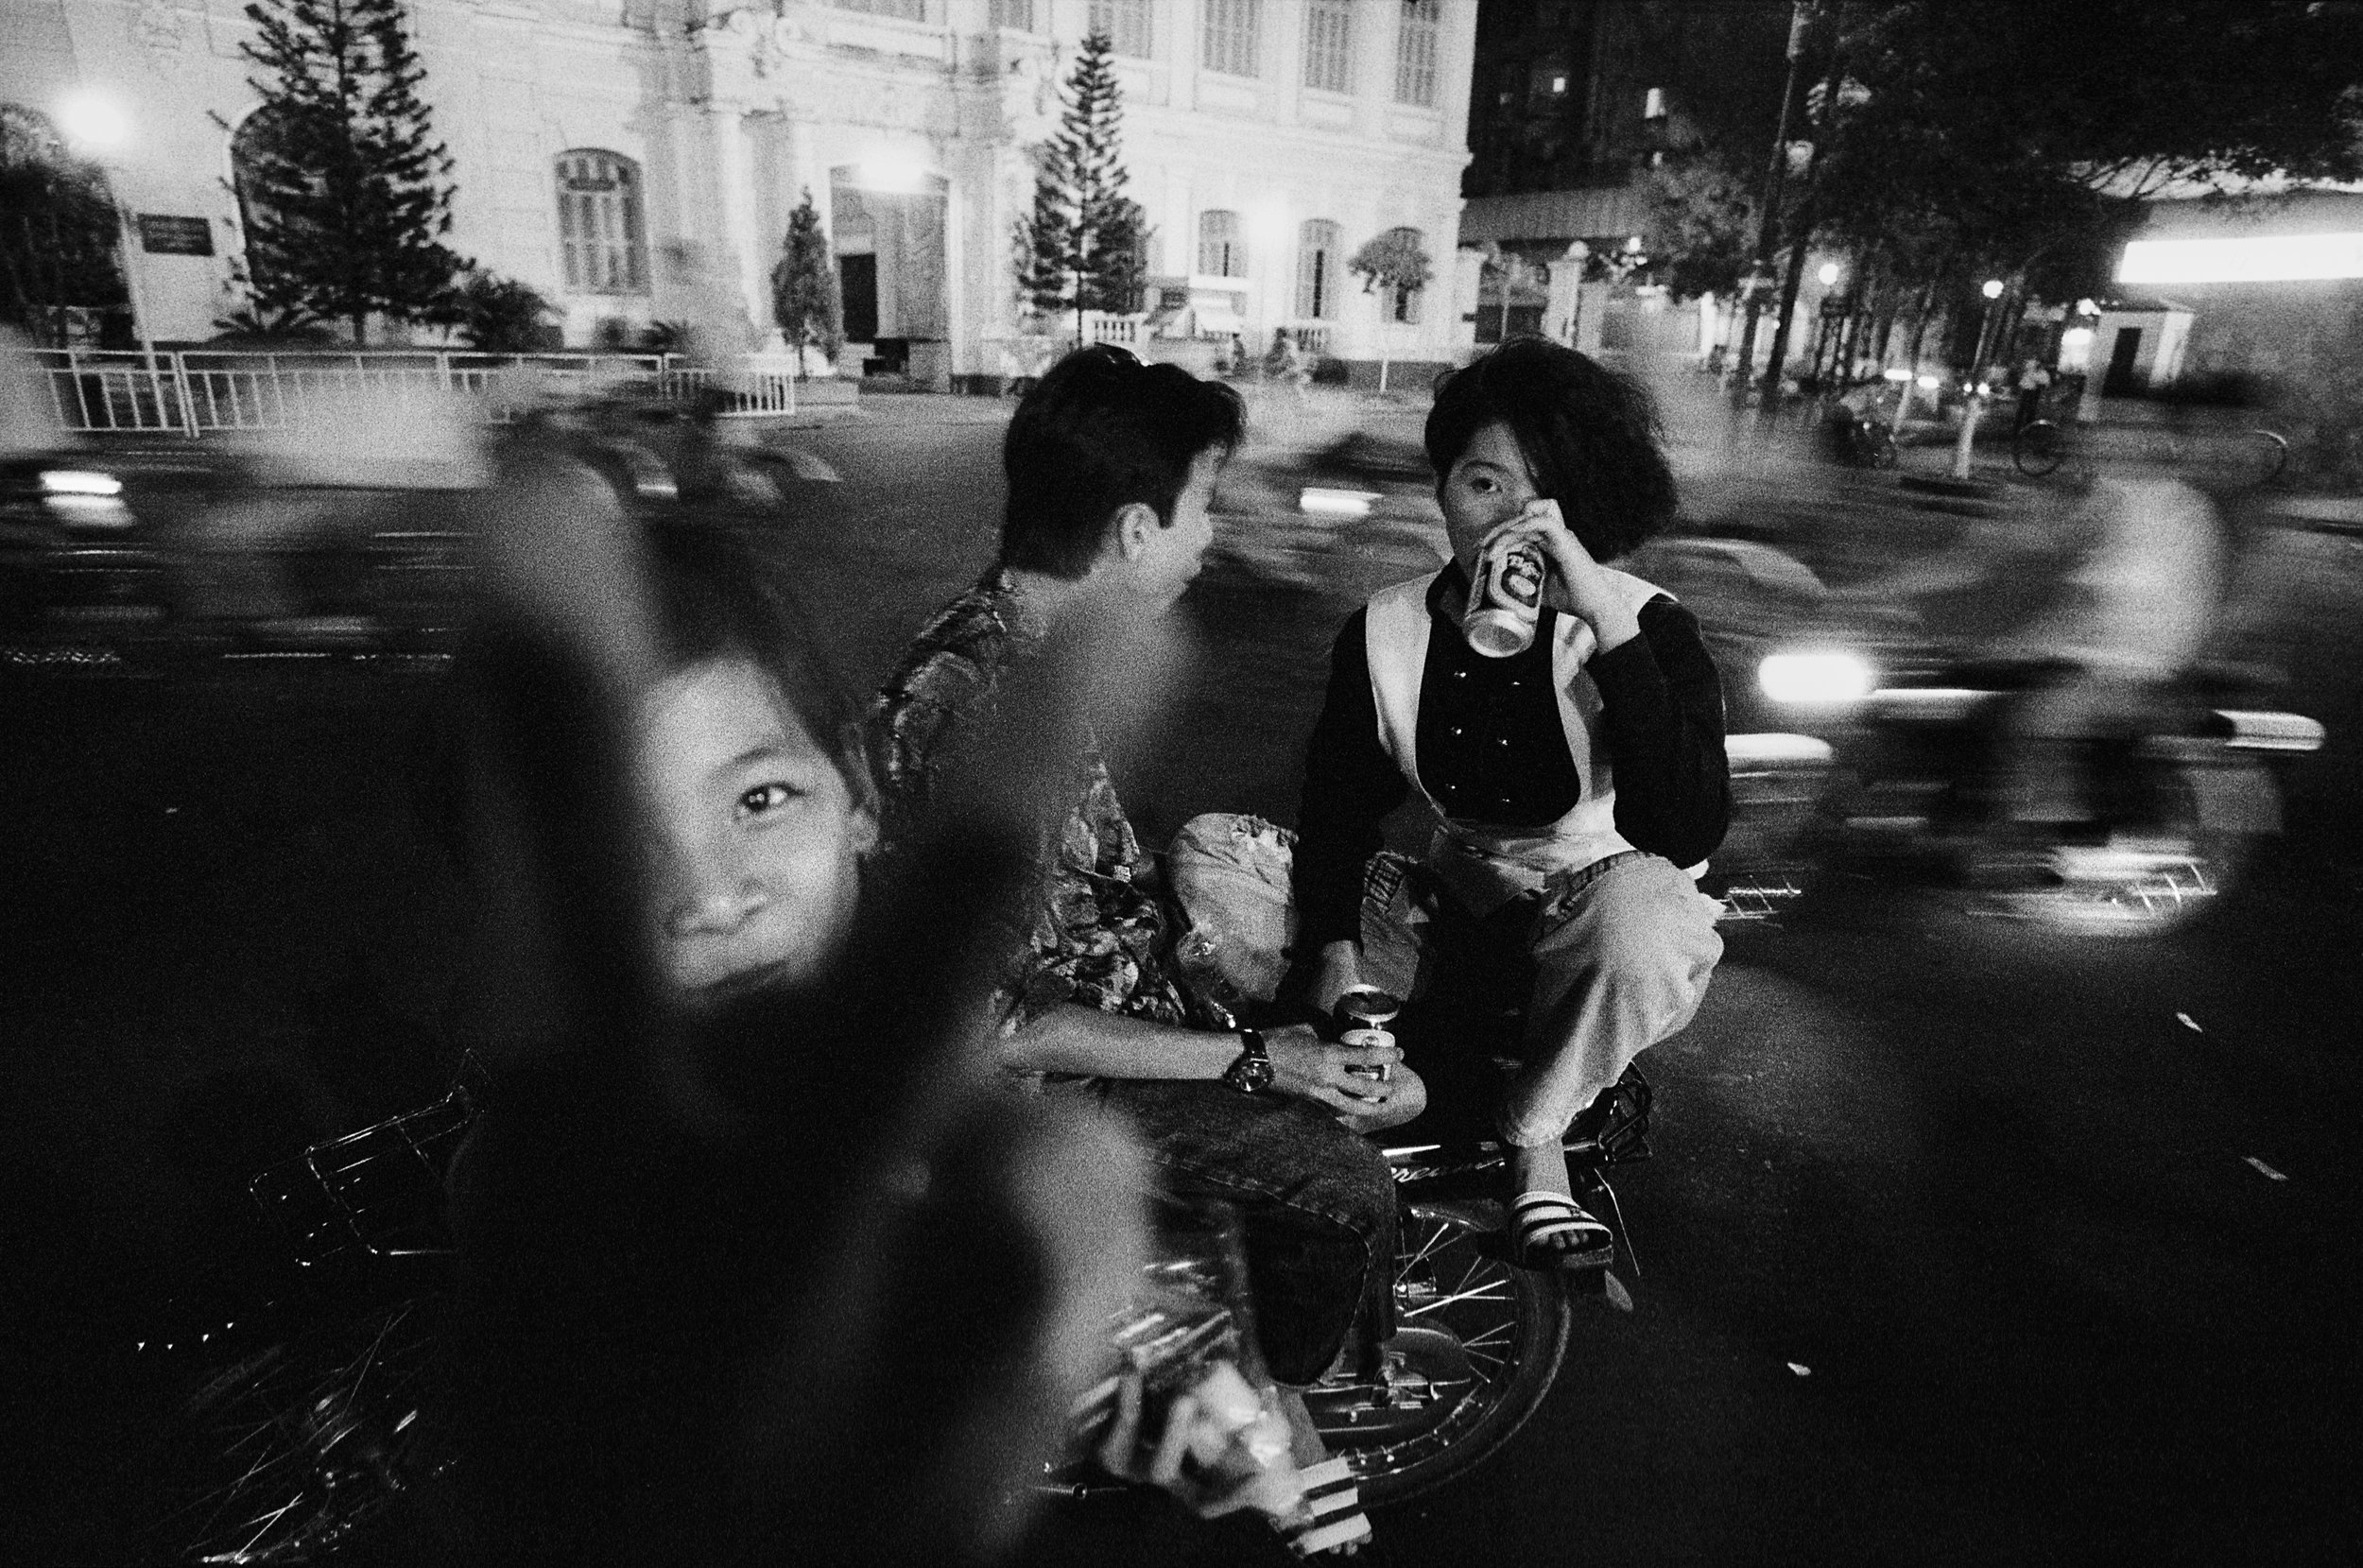  Cruising the city streets of downtown Saigon at night has become a ritual for young people. These teenagers drink beer in front of City Hall. 